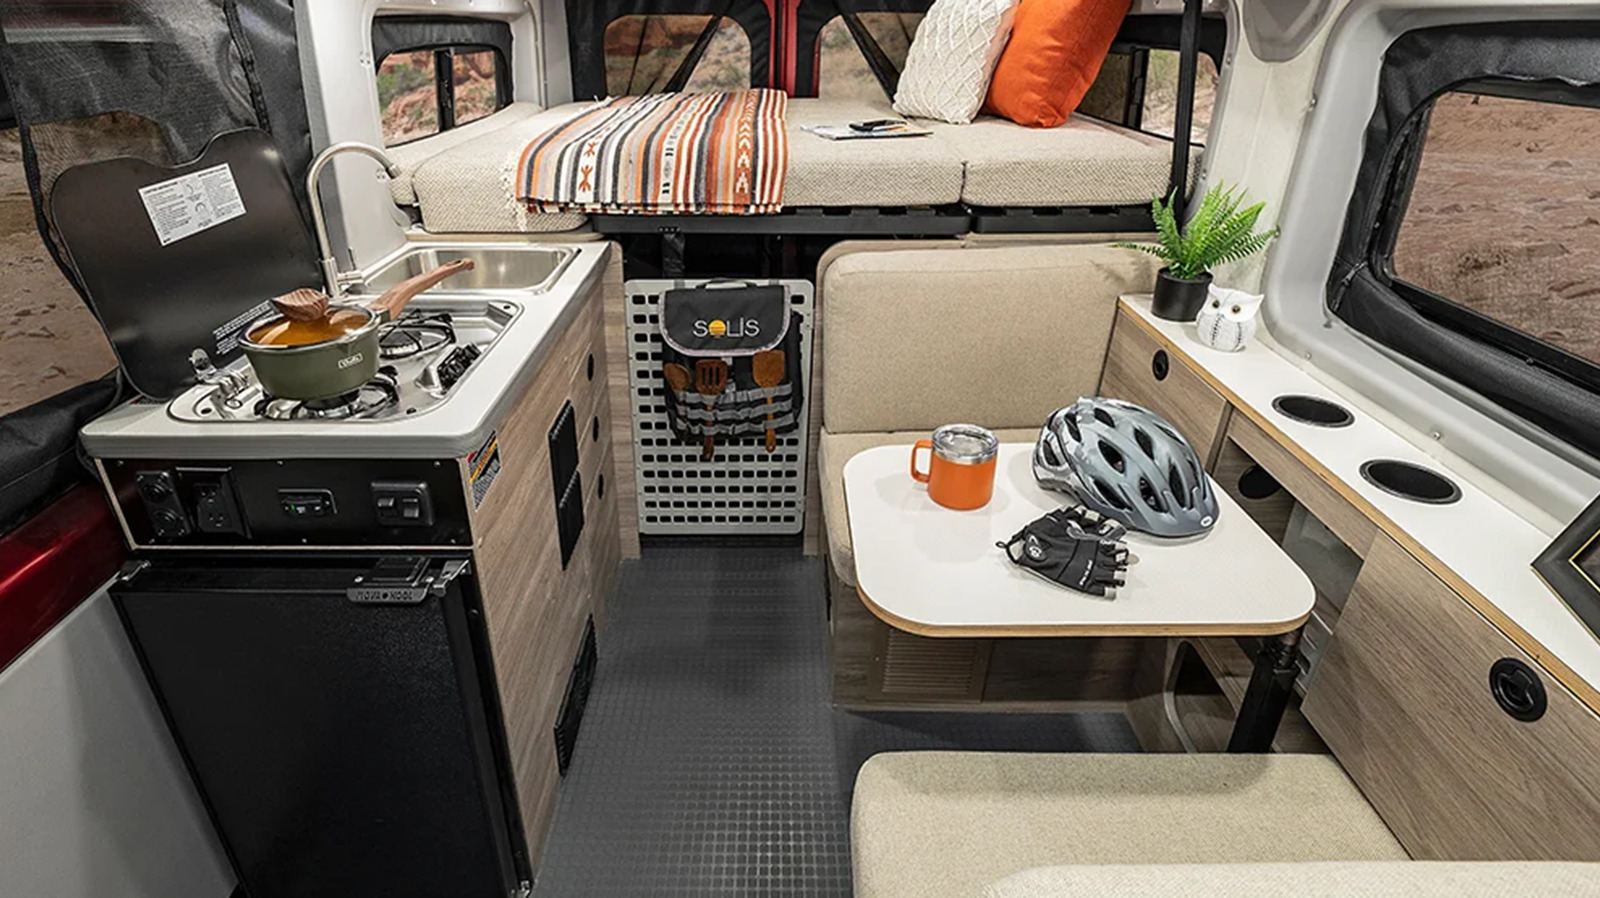 8 Tips for Making the Most of Your RV Kitchen - Winnebago